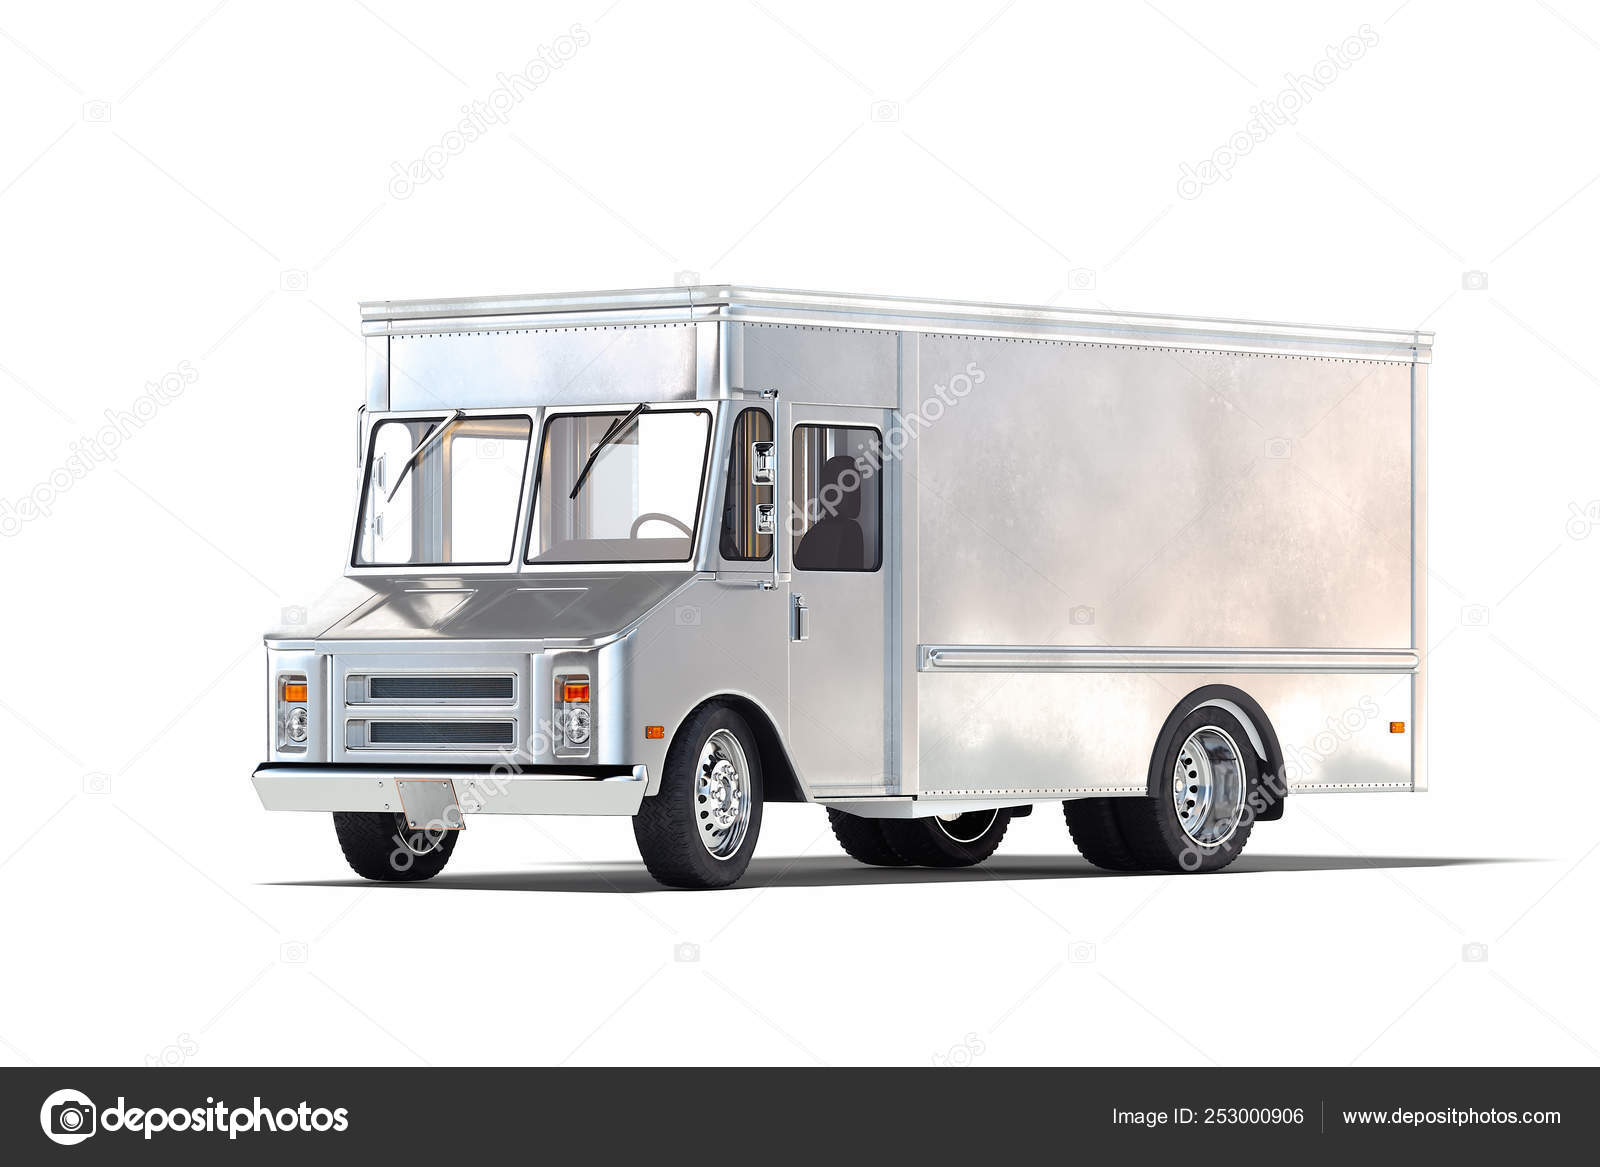 Download 191 Food Truck Template Stock Photos Free Royalty Free Food Truck Template Images Depositphotos